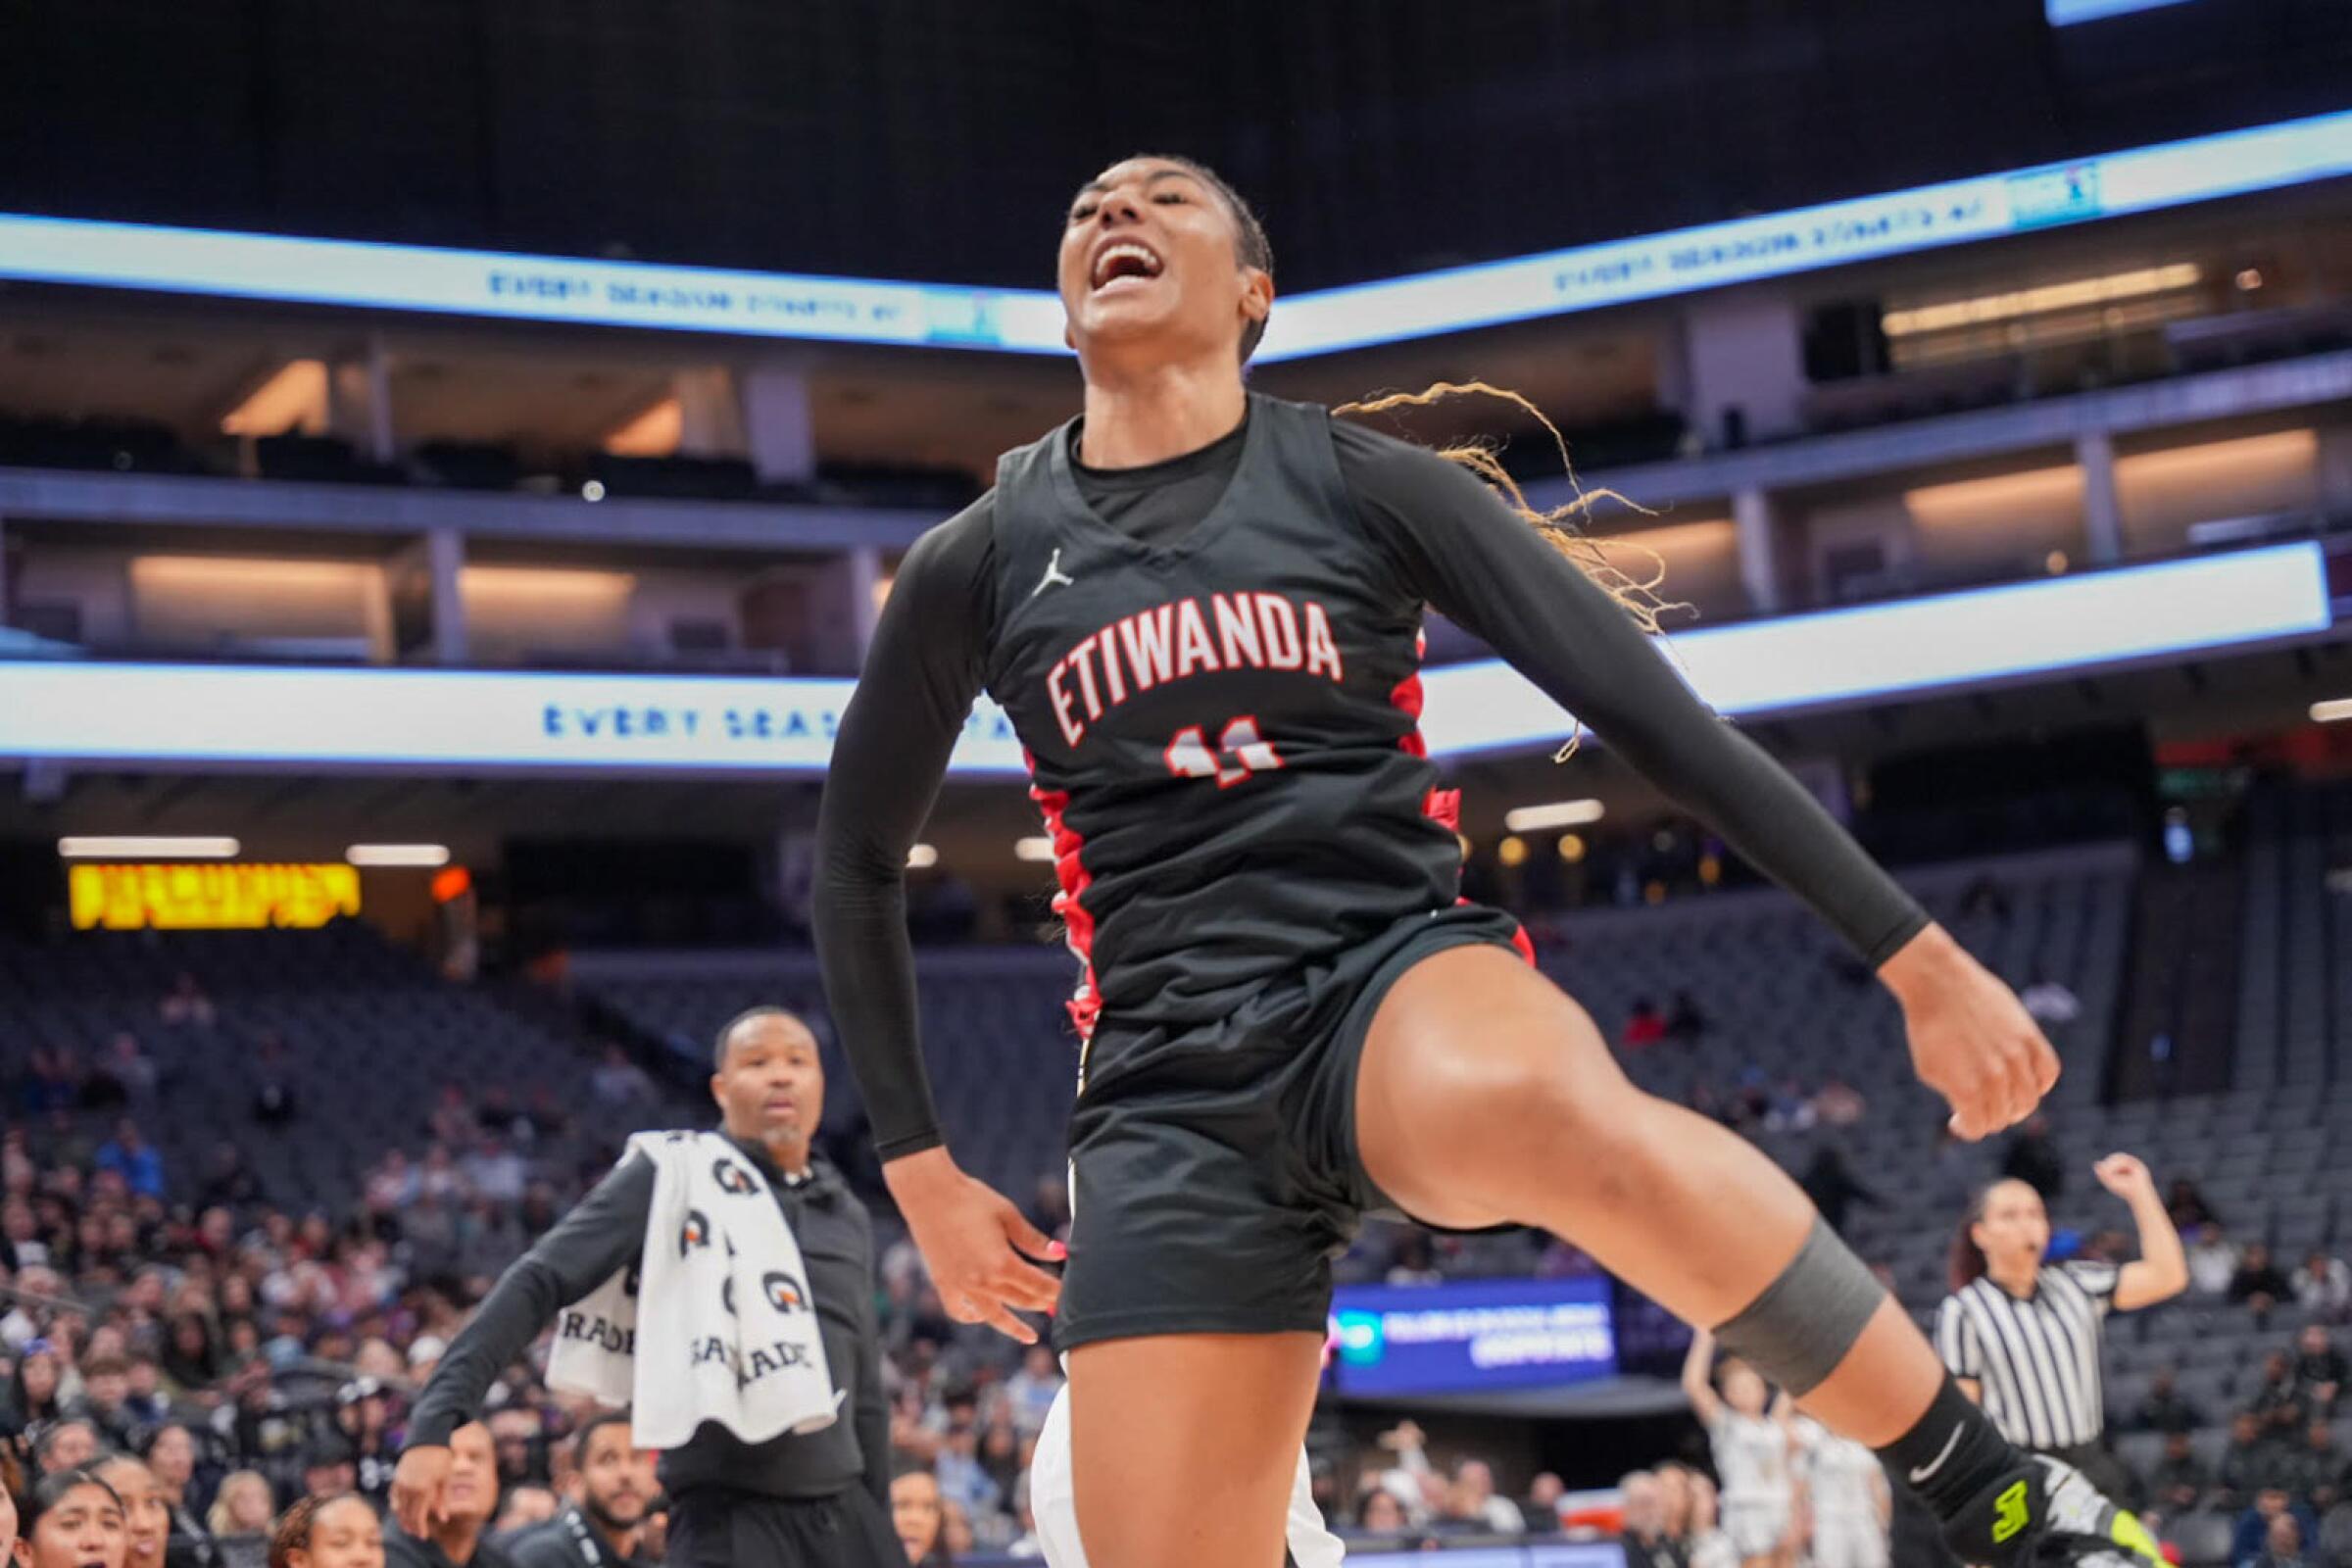 McDonald's All-American Kennedy Smith of Etiwanda celebrates during the first half.